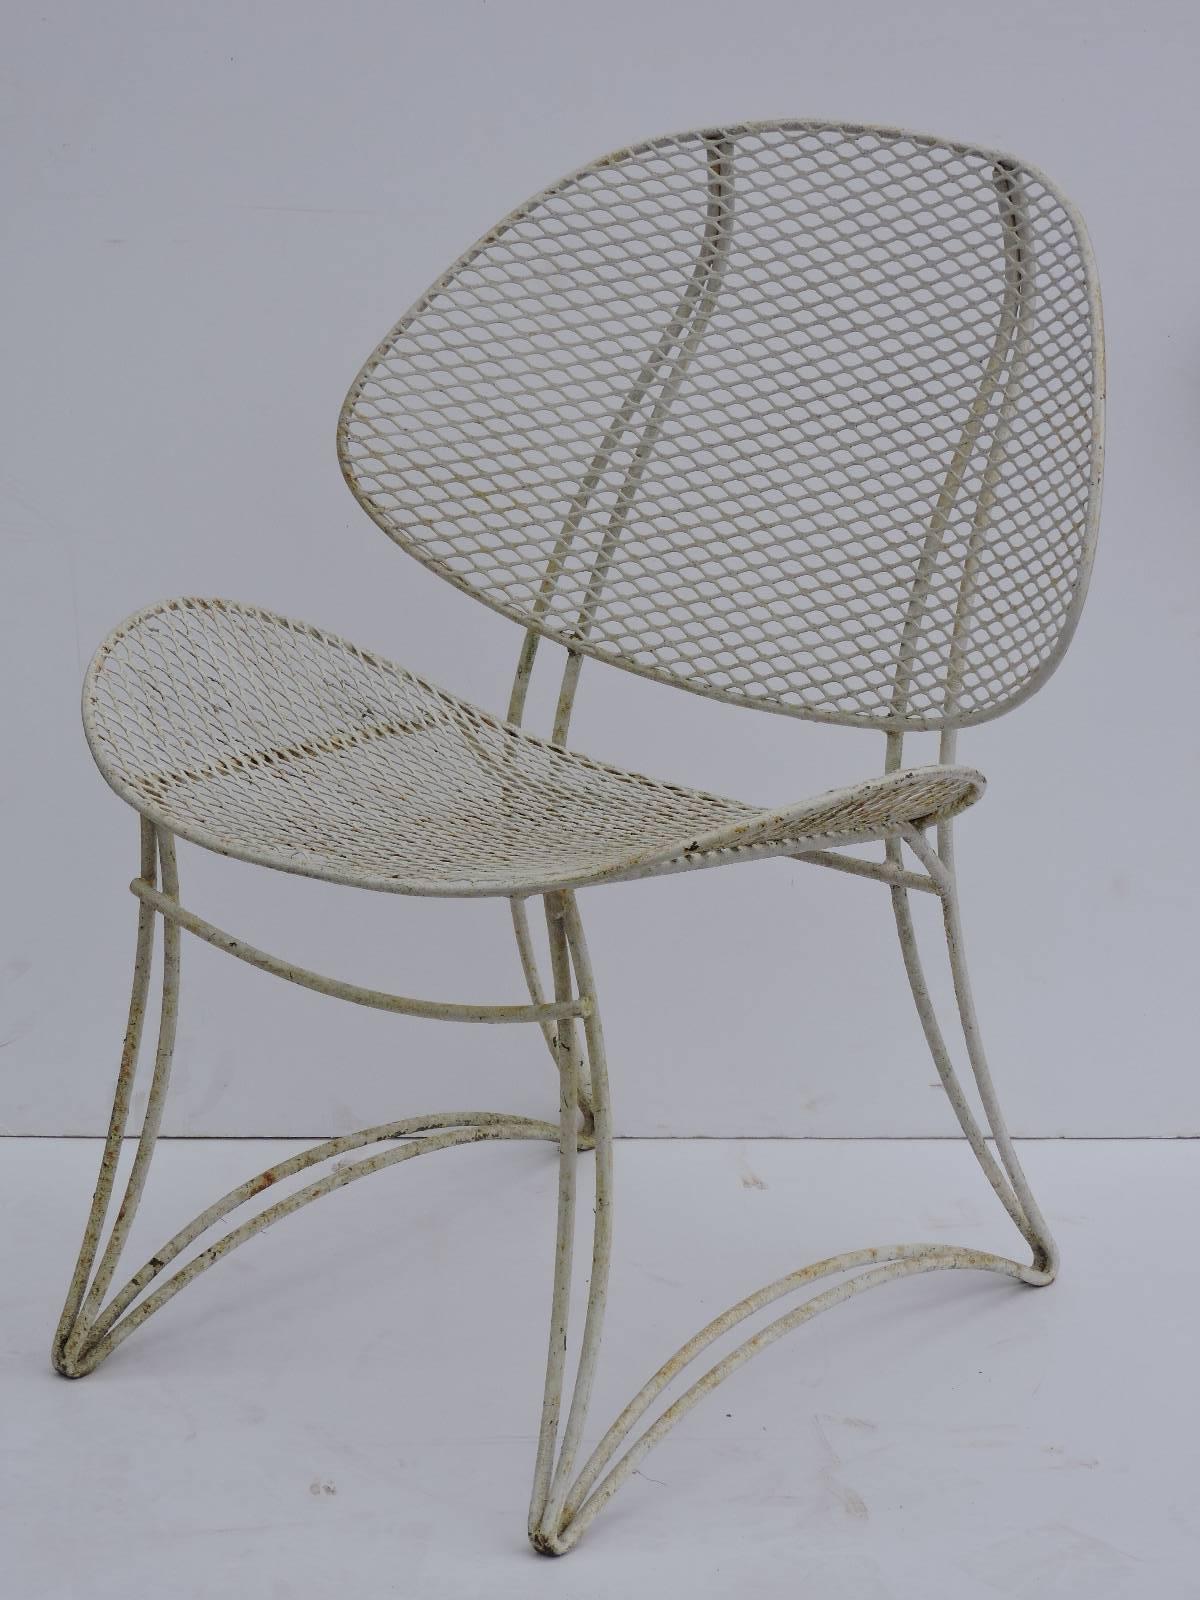 Modernist Wrought Iron Clam Shell Chairs 1